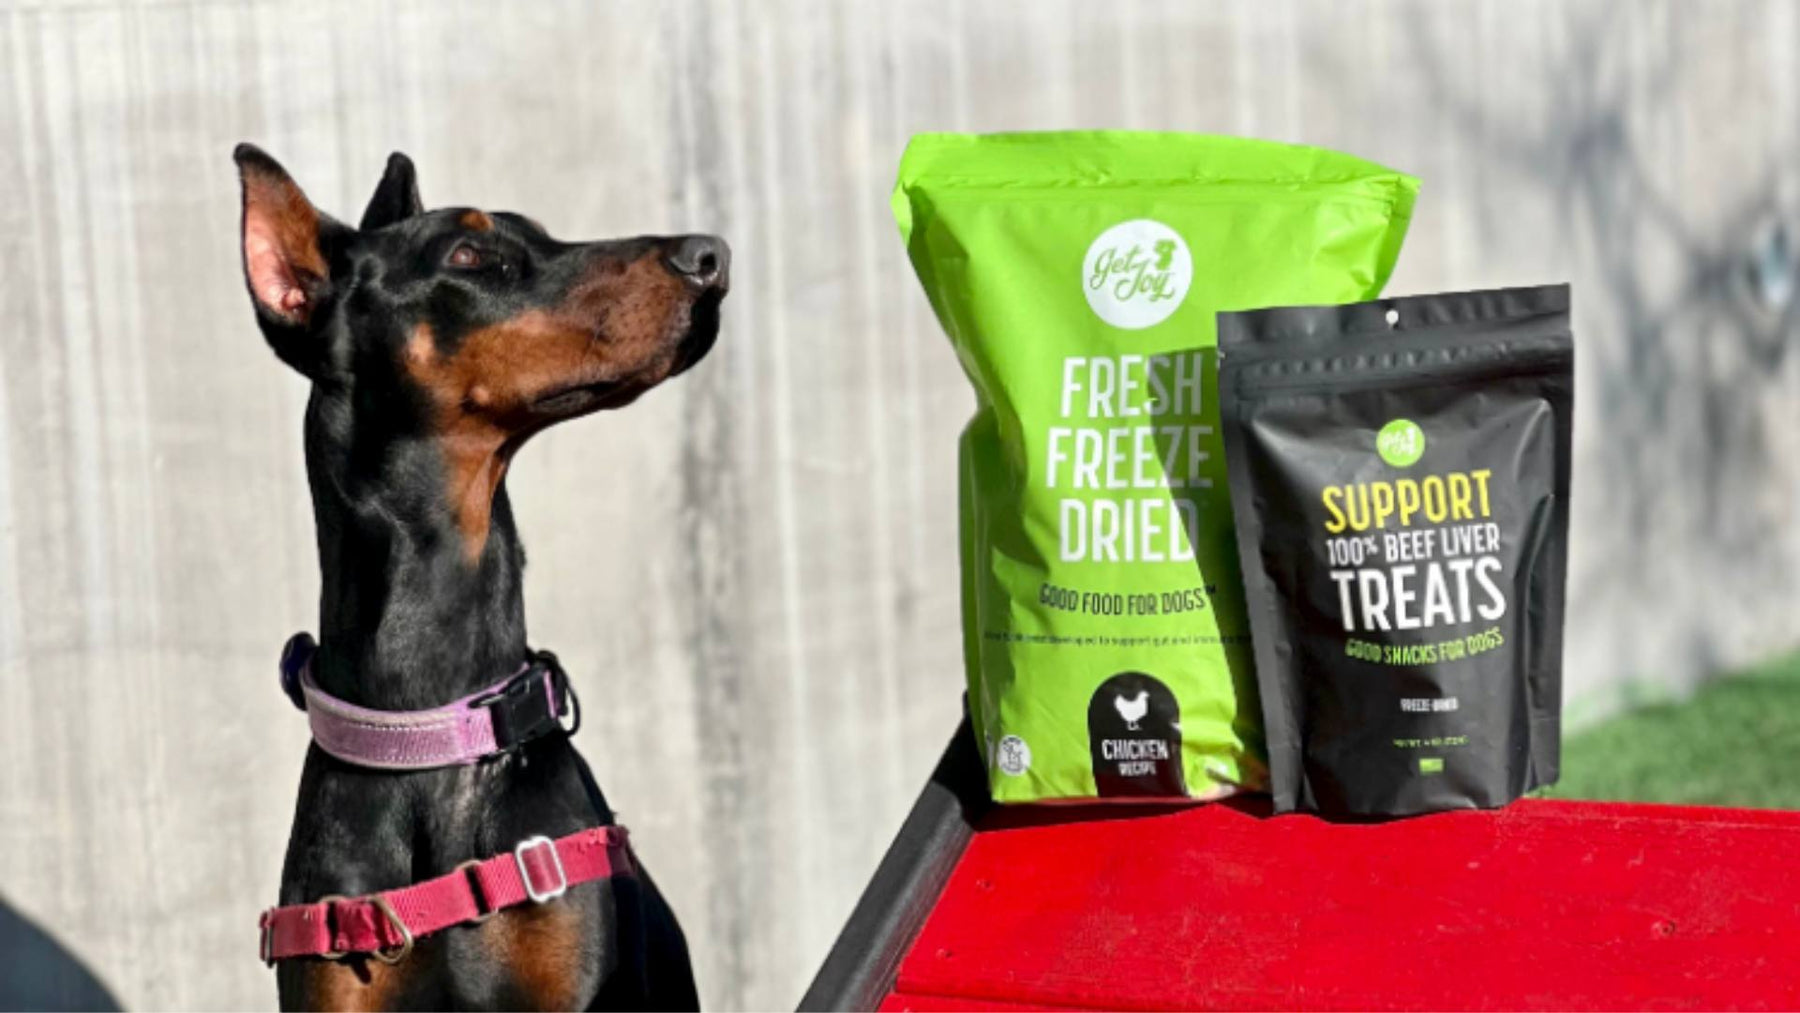 A Doberman sits outside next to two bags of Get Joy food and treats, which are displayed on a red table.